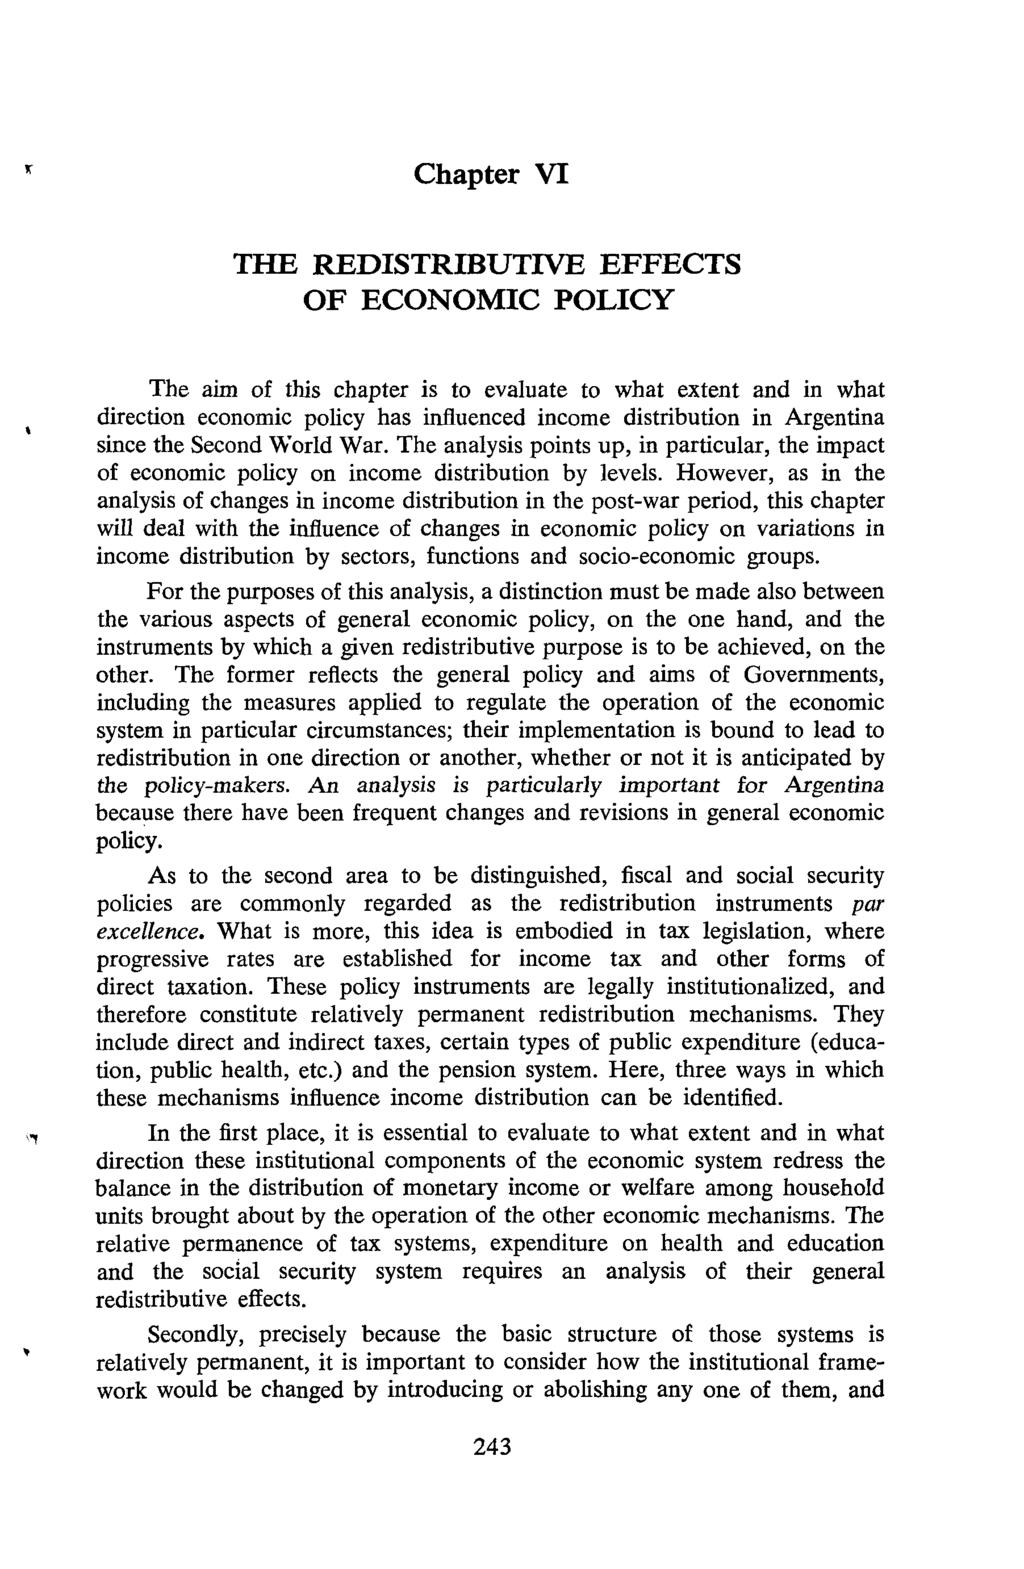 Chapter VI THE REDISTRIBUTIVE EFFECTS OF ECONOMIC POLICY The aim of this chapter is to evaluate to what extent and in what direction economic policy has influenced income distribution in Argentina